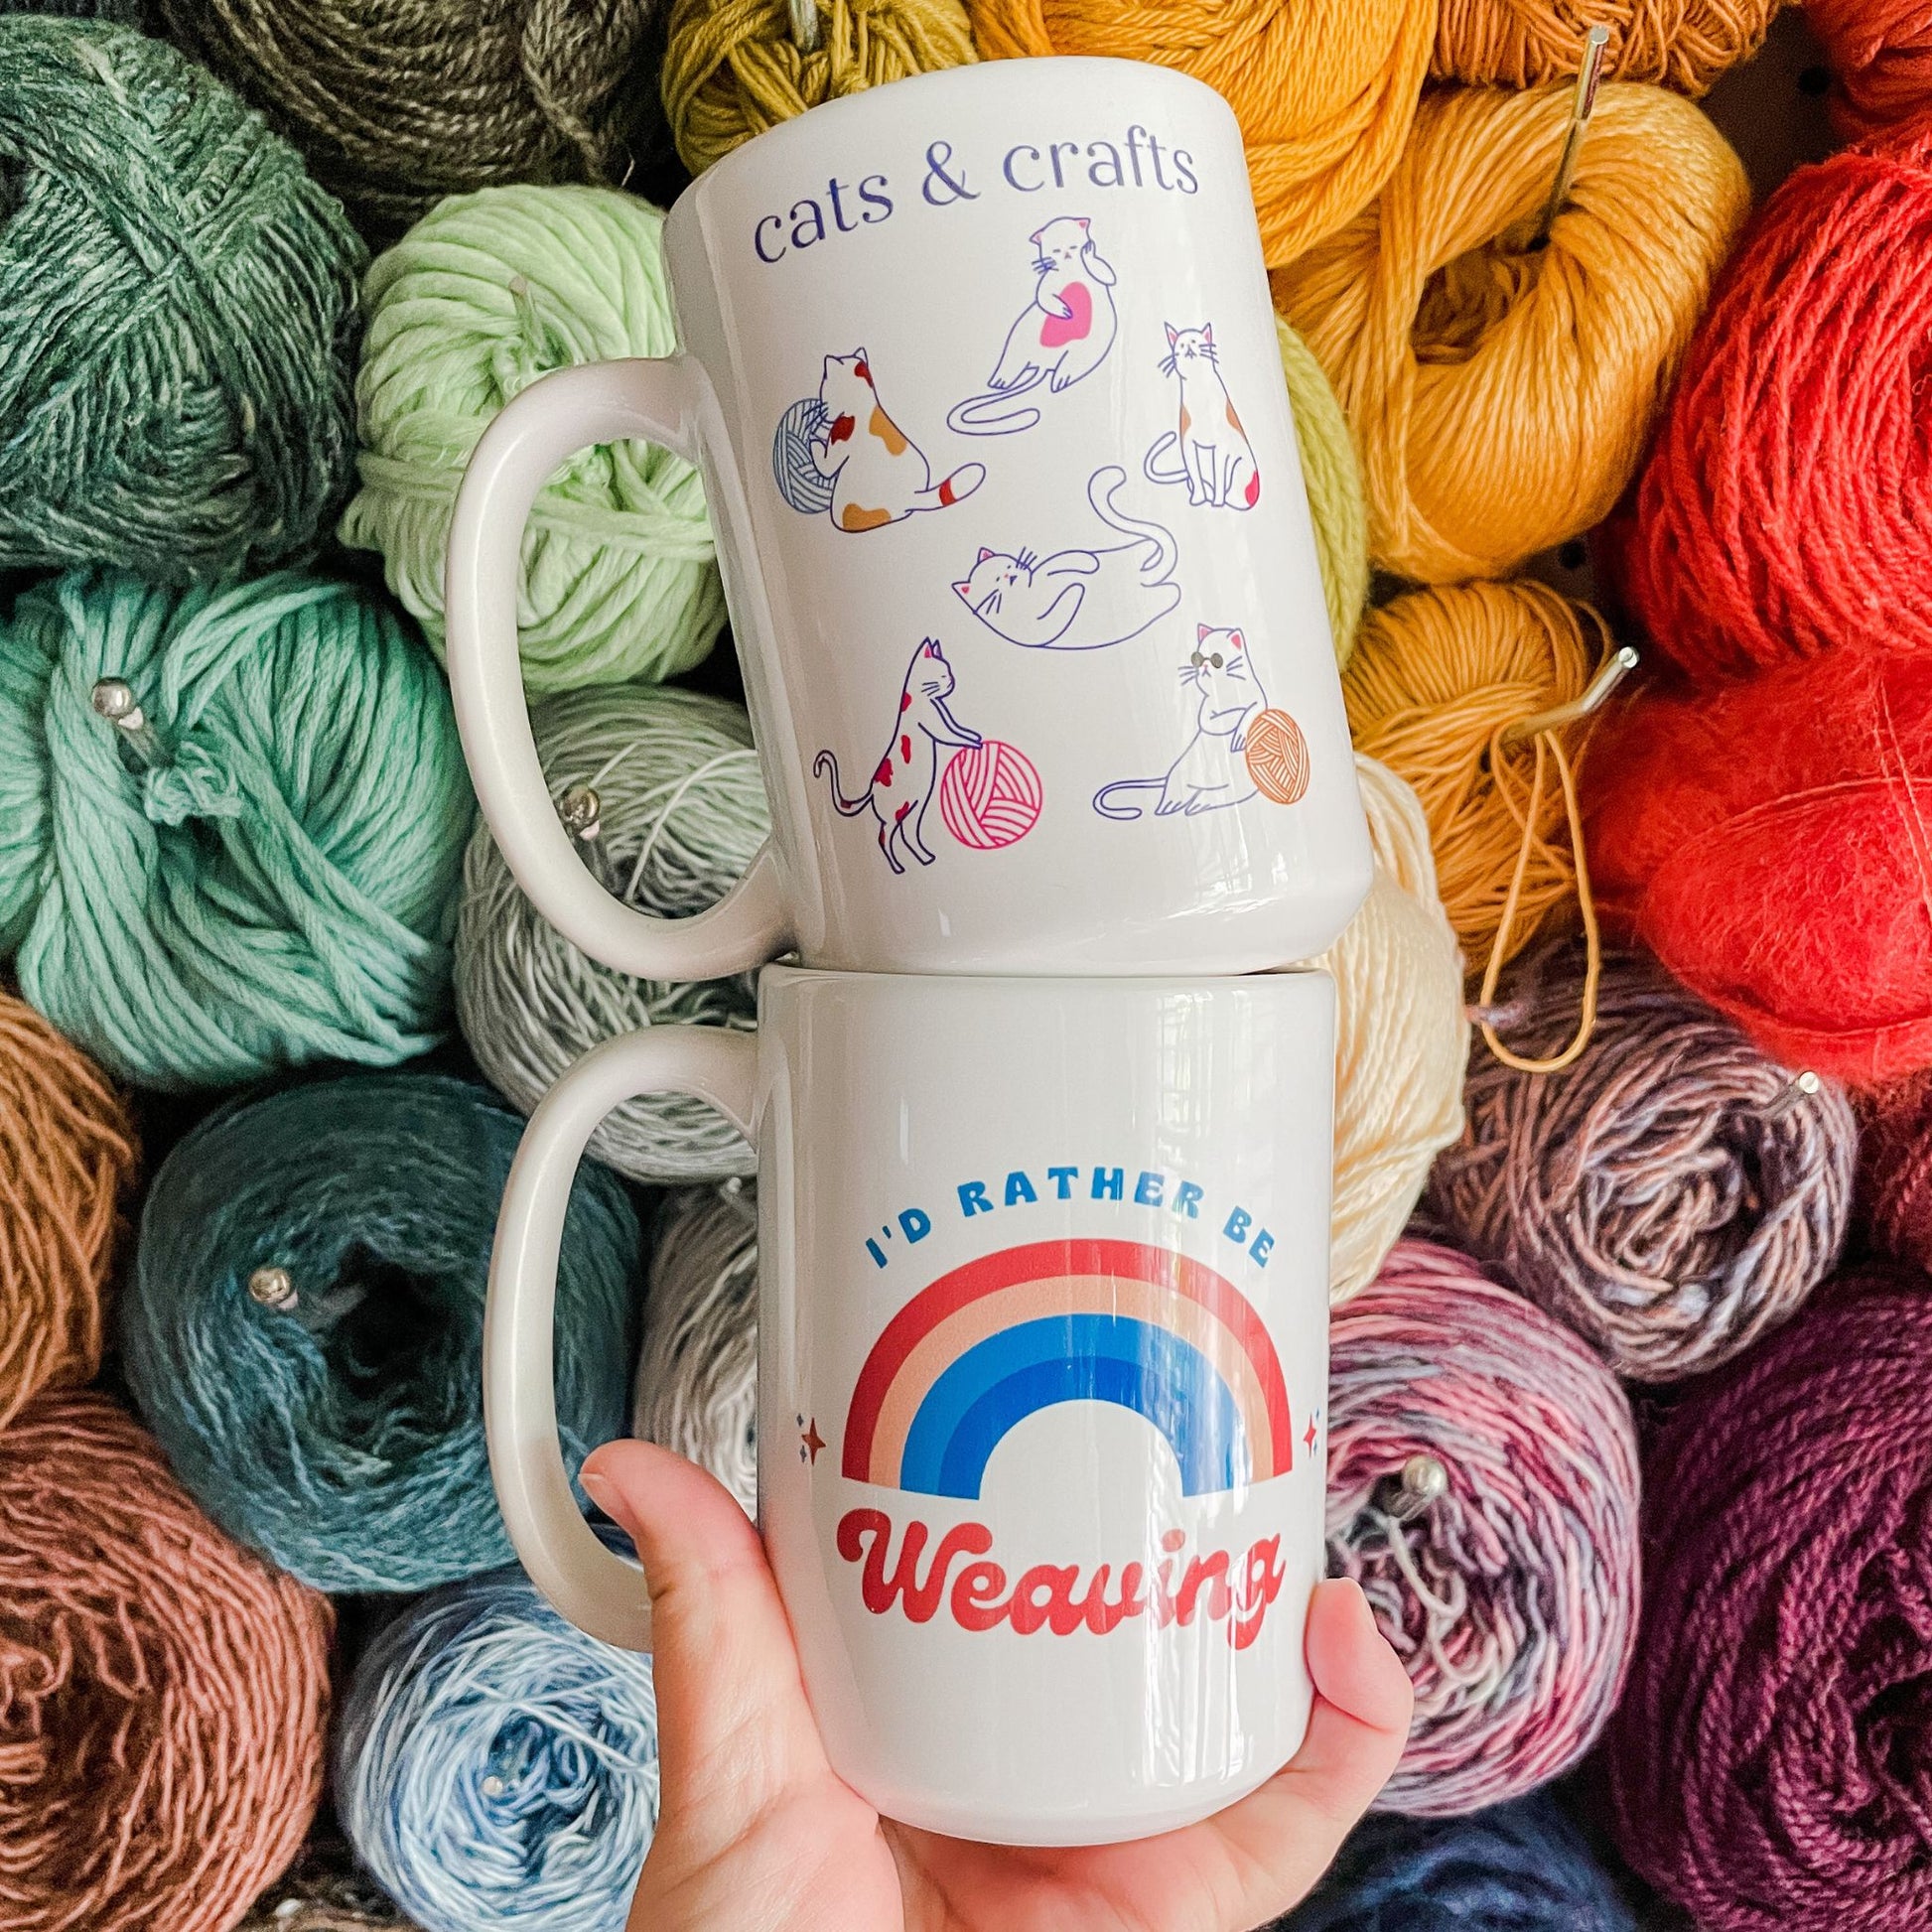 i'd rather be weaving mug - wear and woven